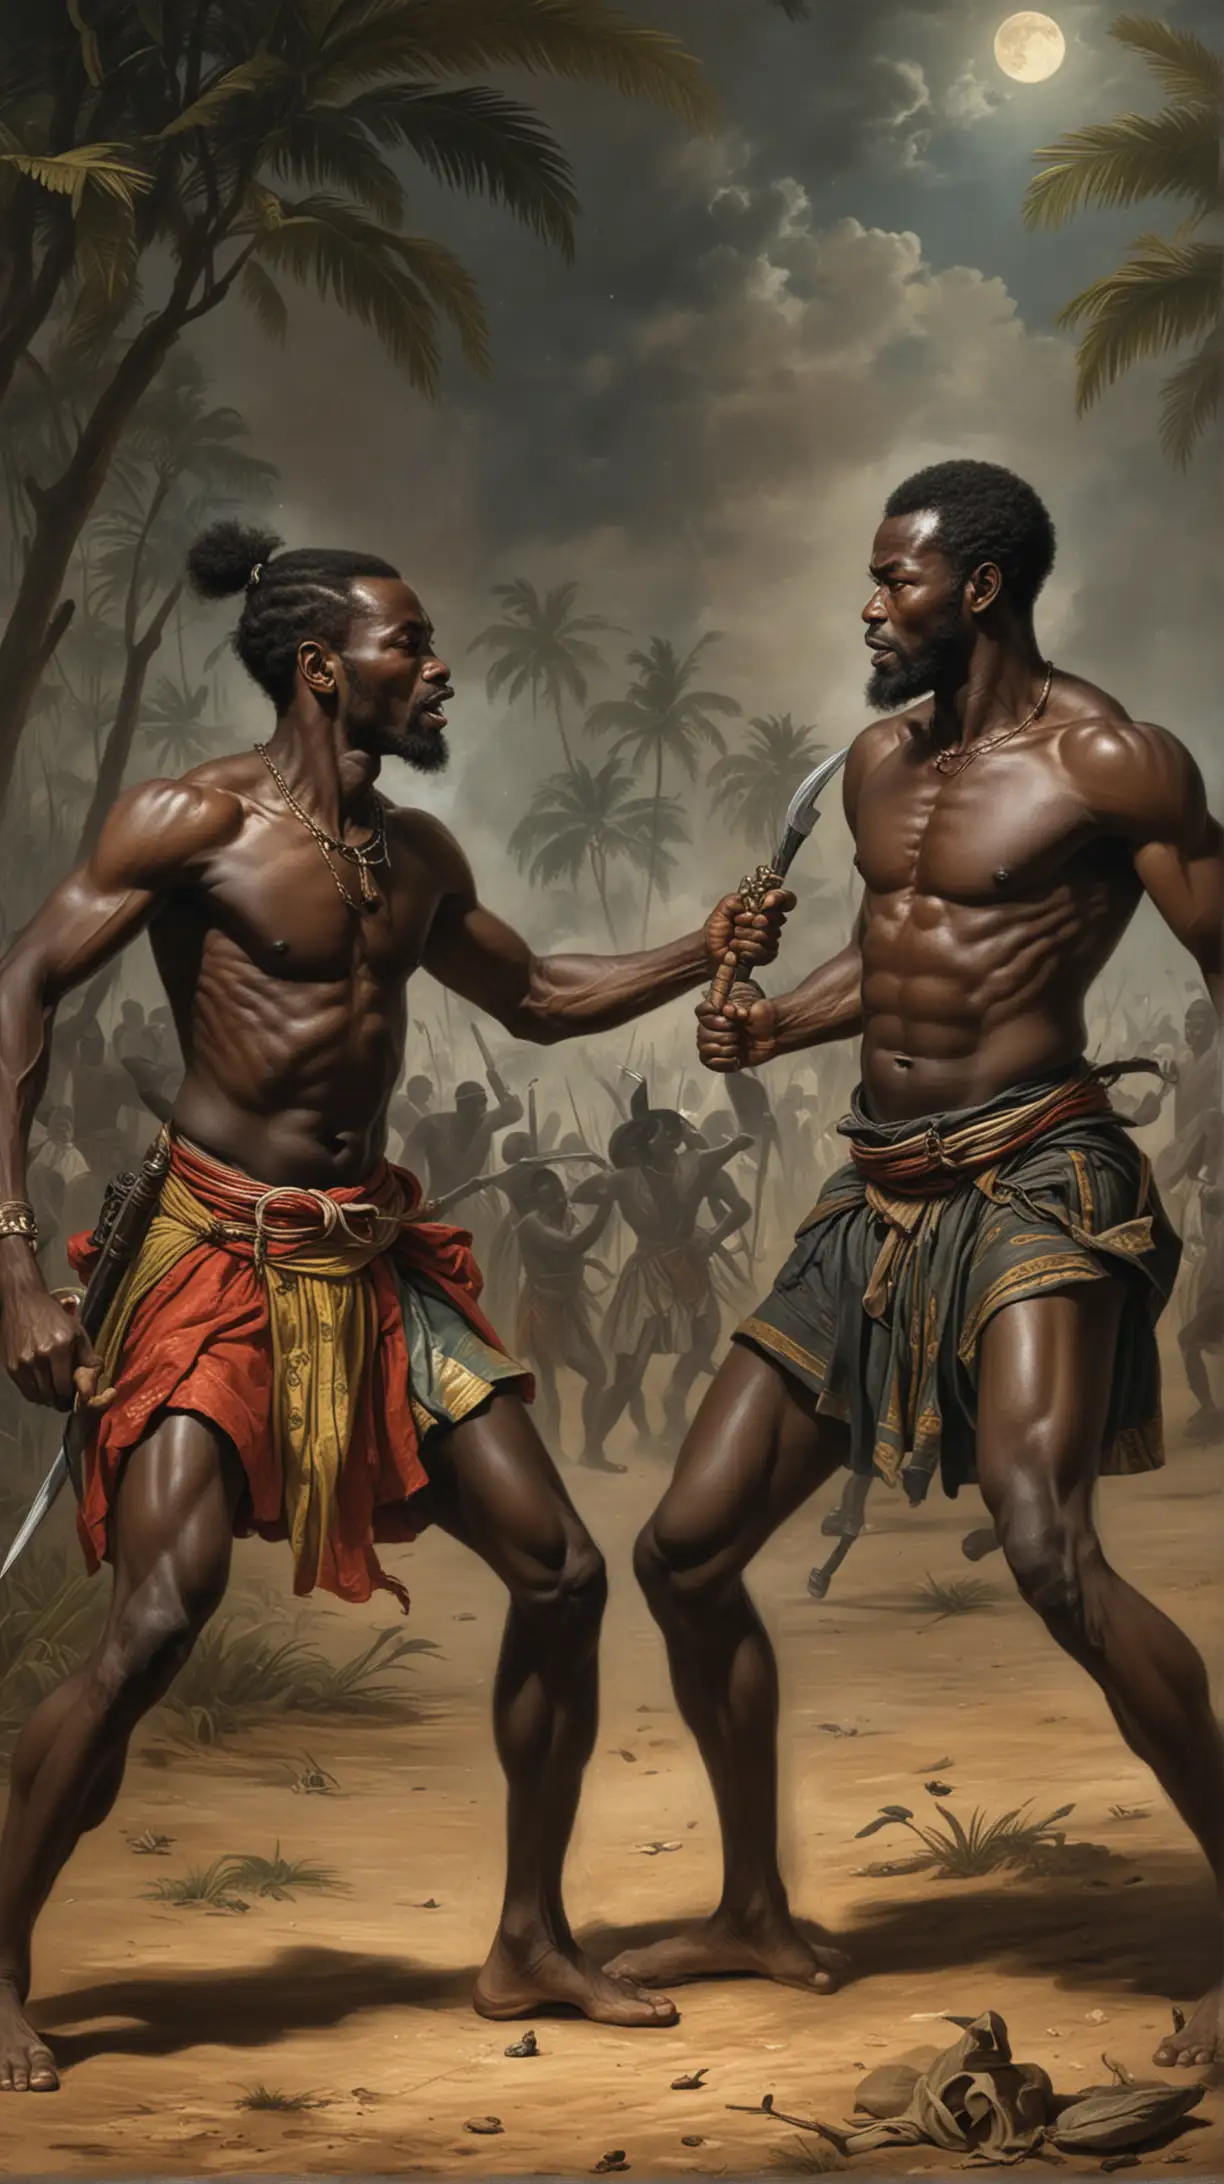 Zingadi, 1600s Angola. two strong black men fighting each other. it's night
